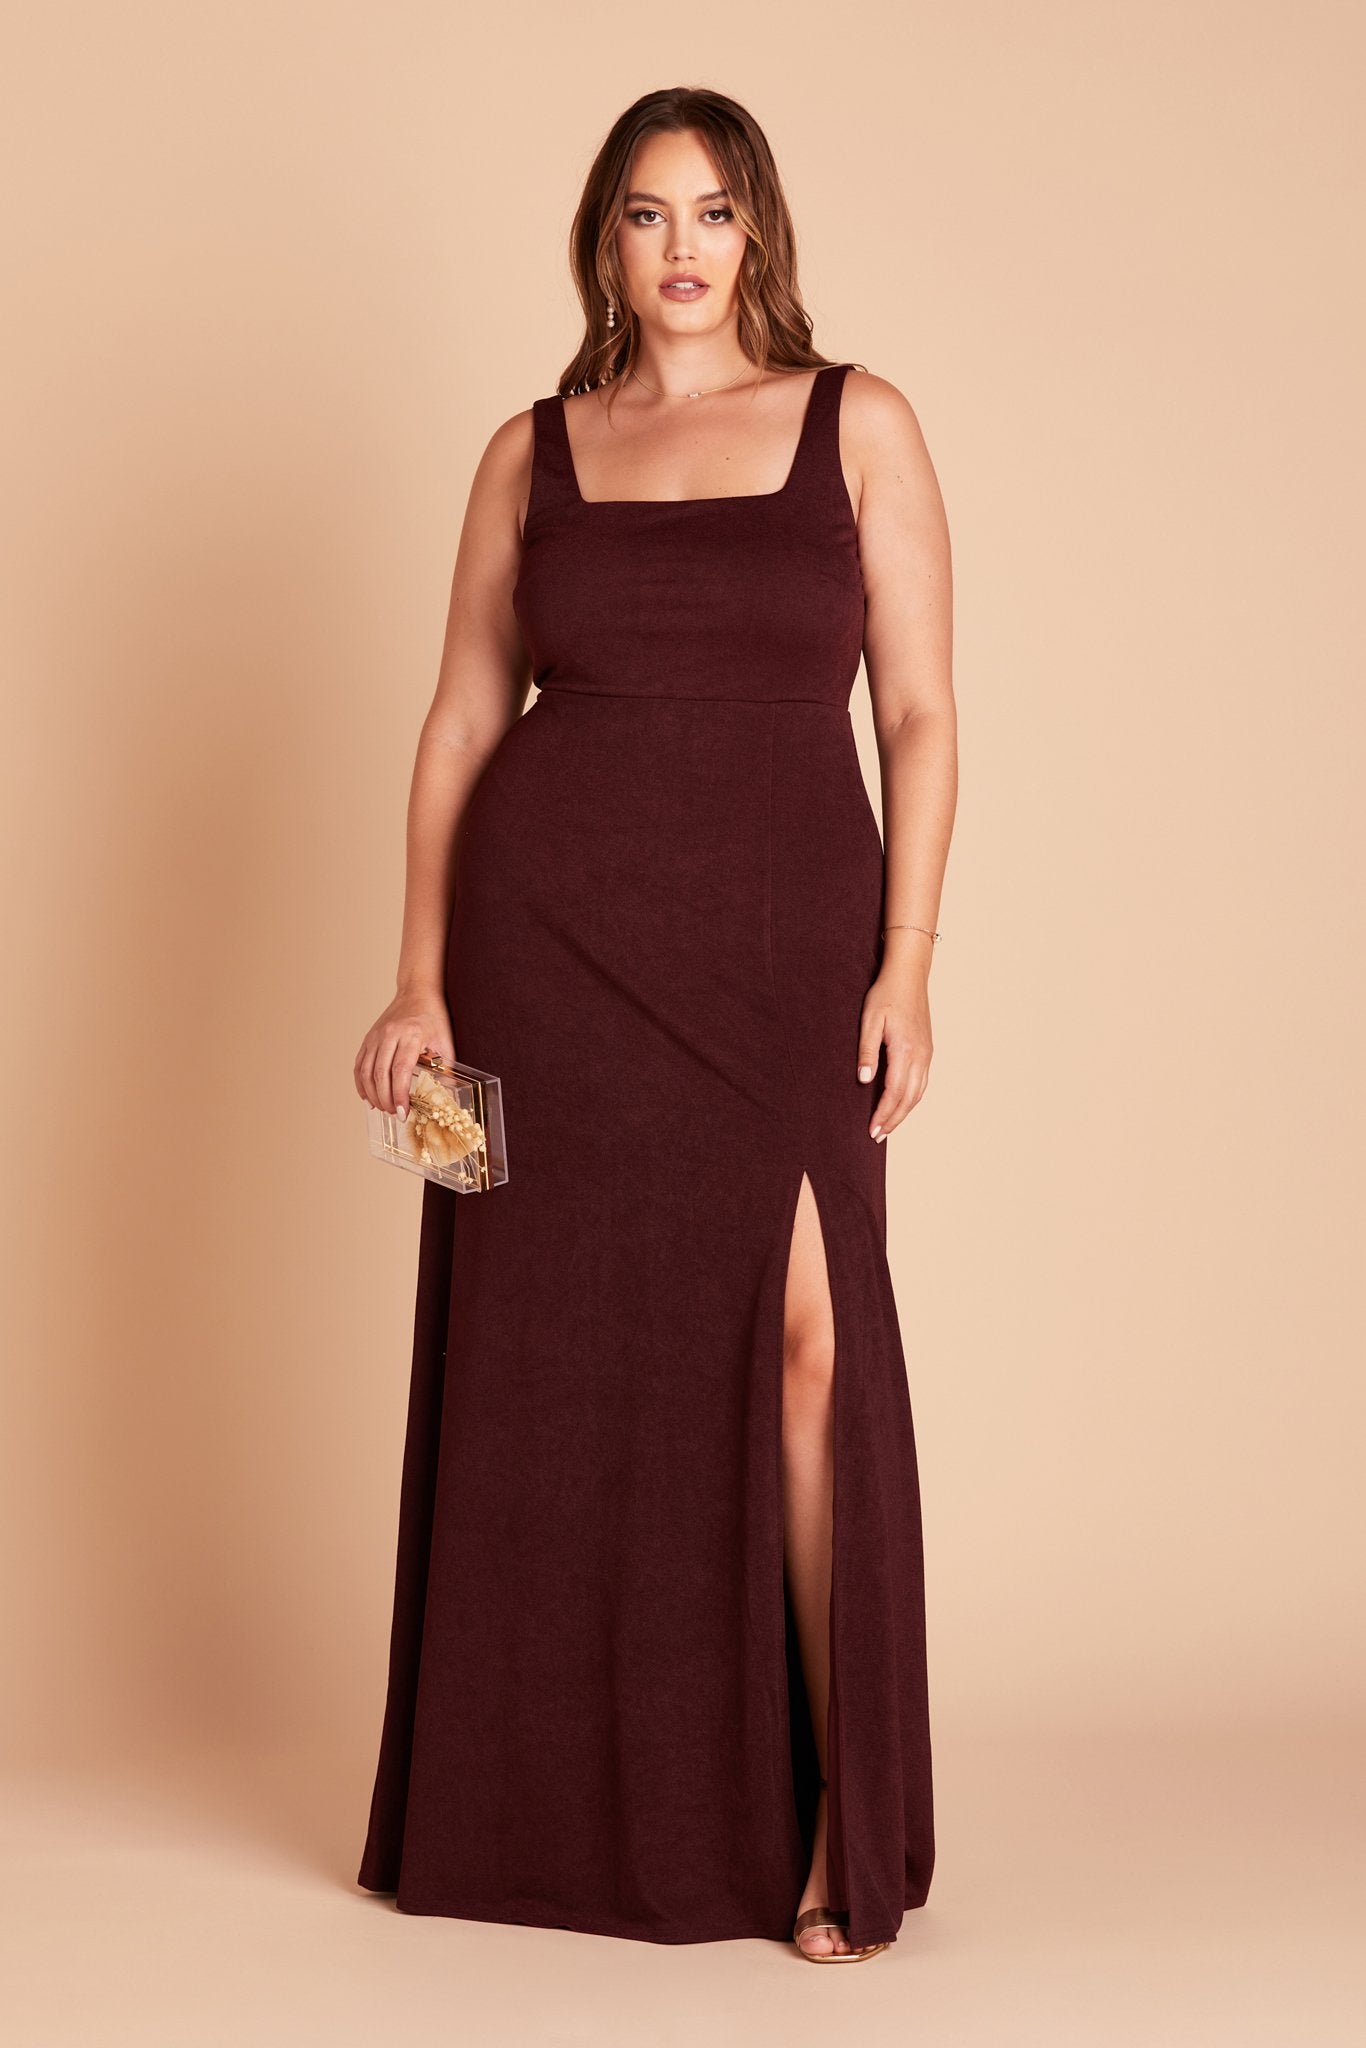 Alex convertible plus size bridesmaid dress with slit in cabernet burgundy crepe by Birdy Grey, front view